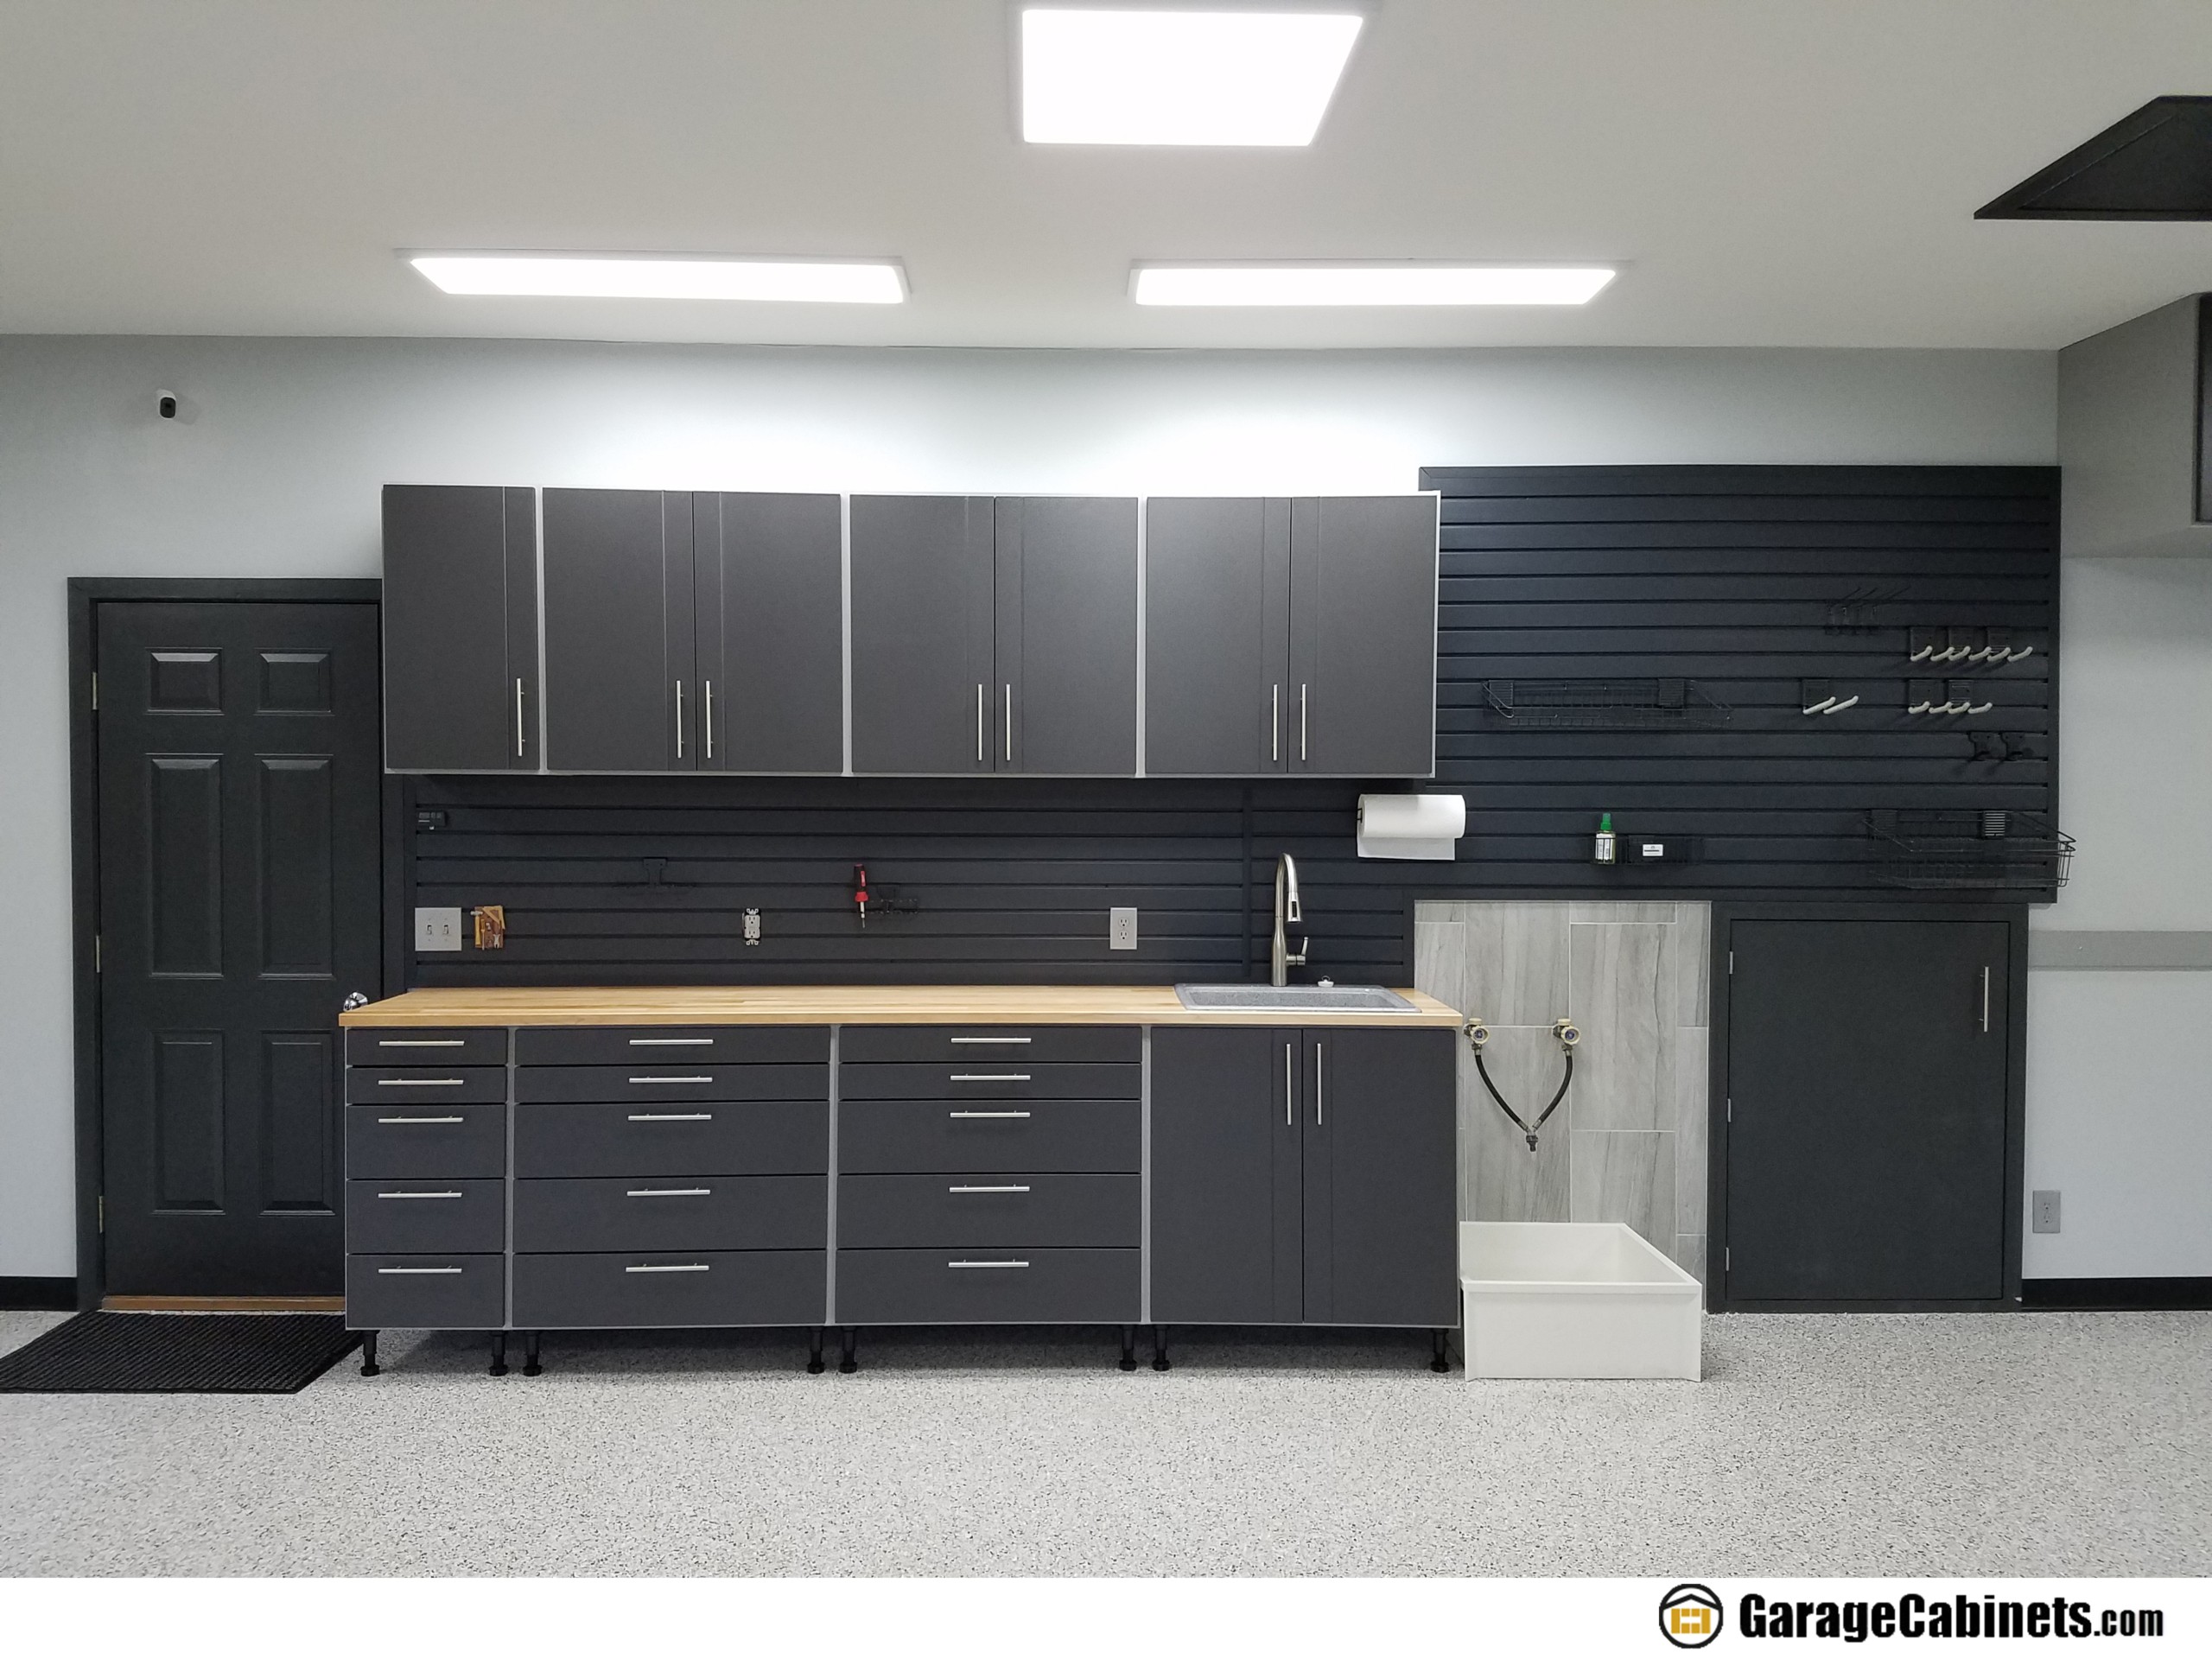 All dream garages must include a garage workbench with storage